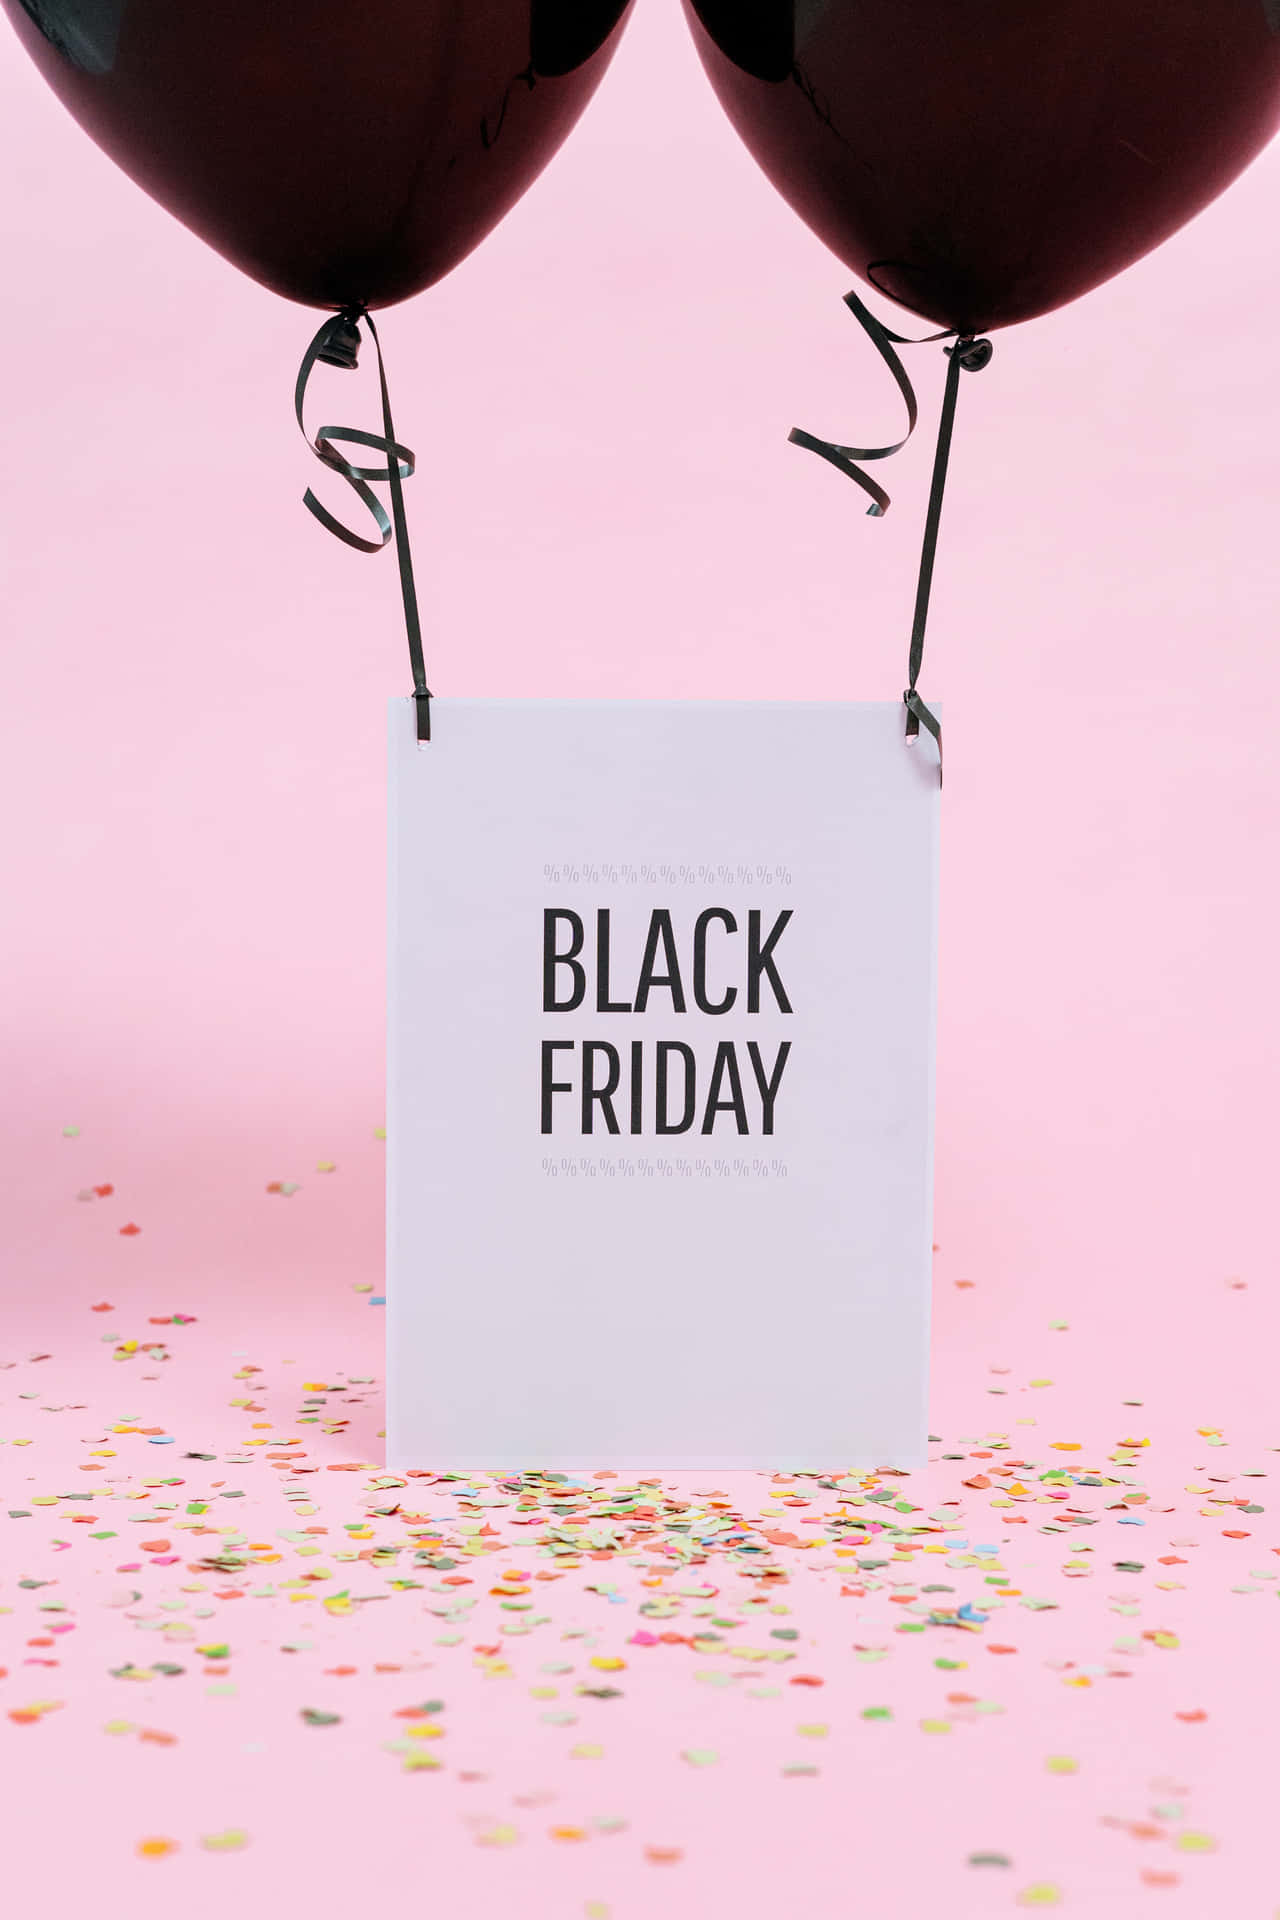 Black Friday Balloons With Confetti On Pink Background Background